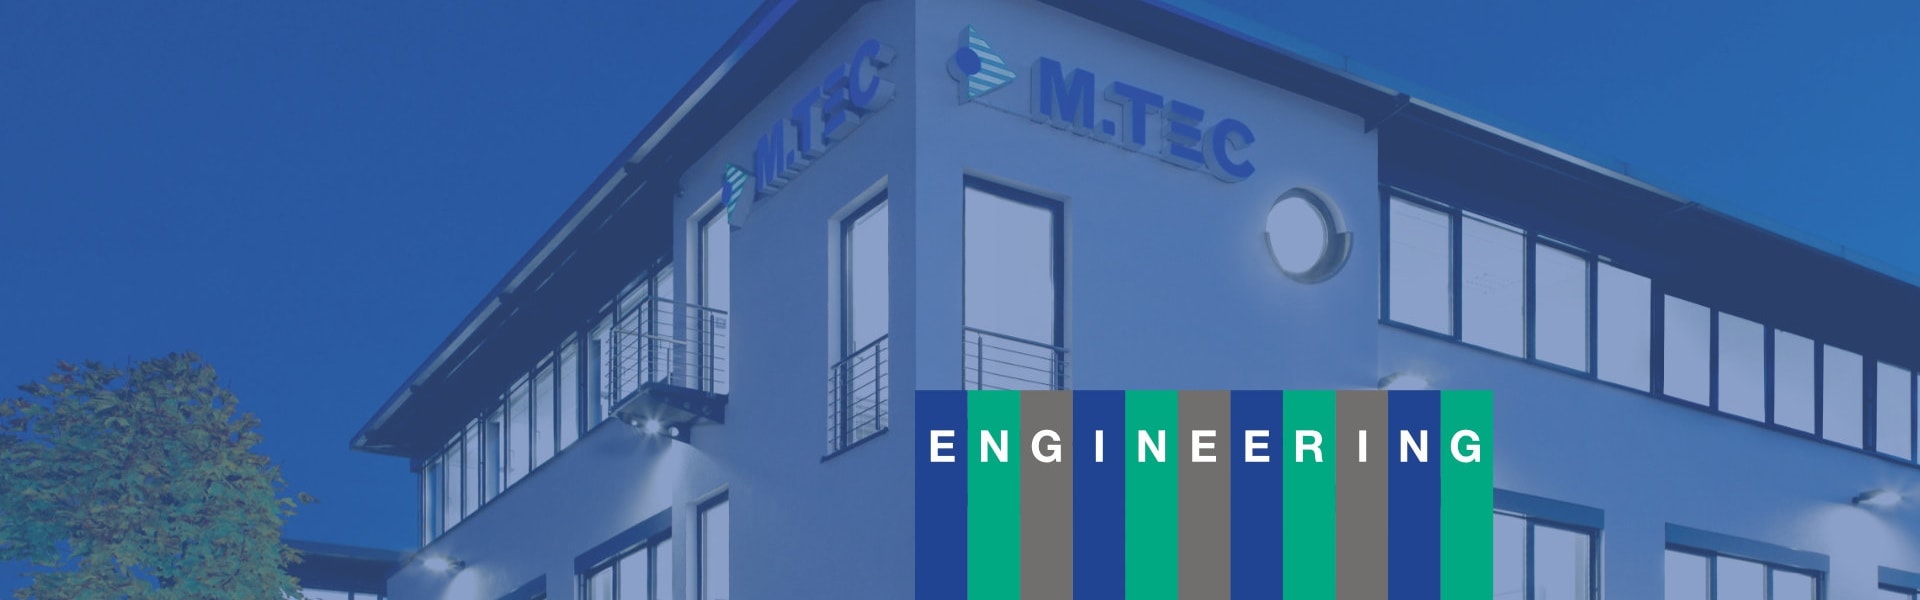 M.TEC ENGINEERING GmbH: New name reflects the company's development